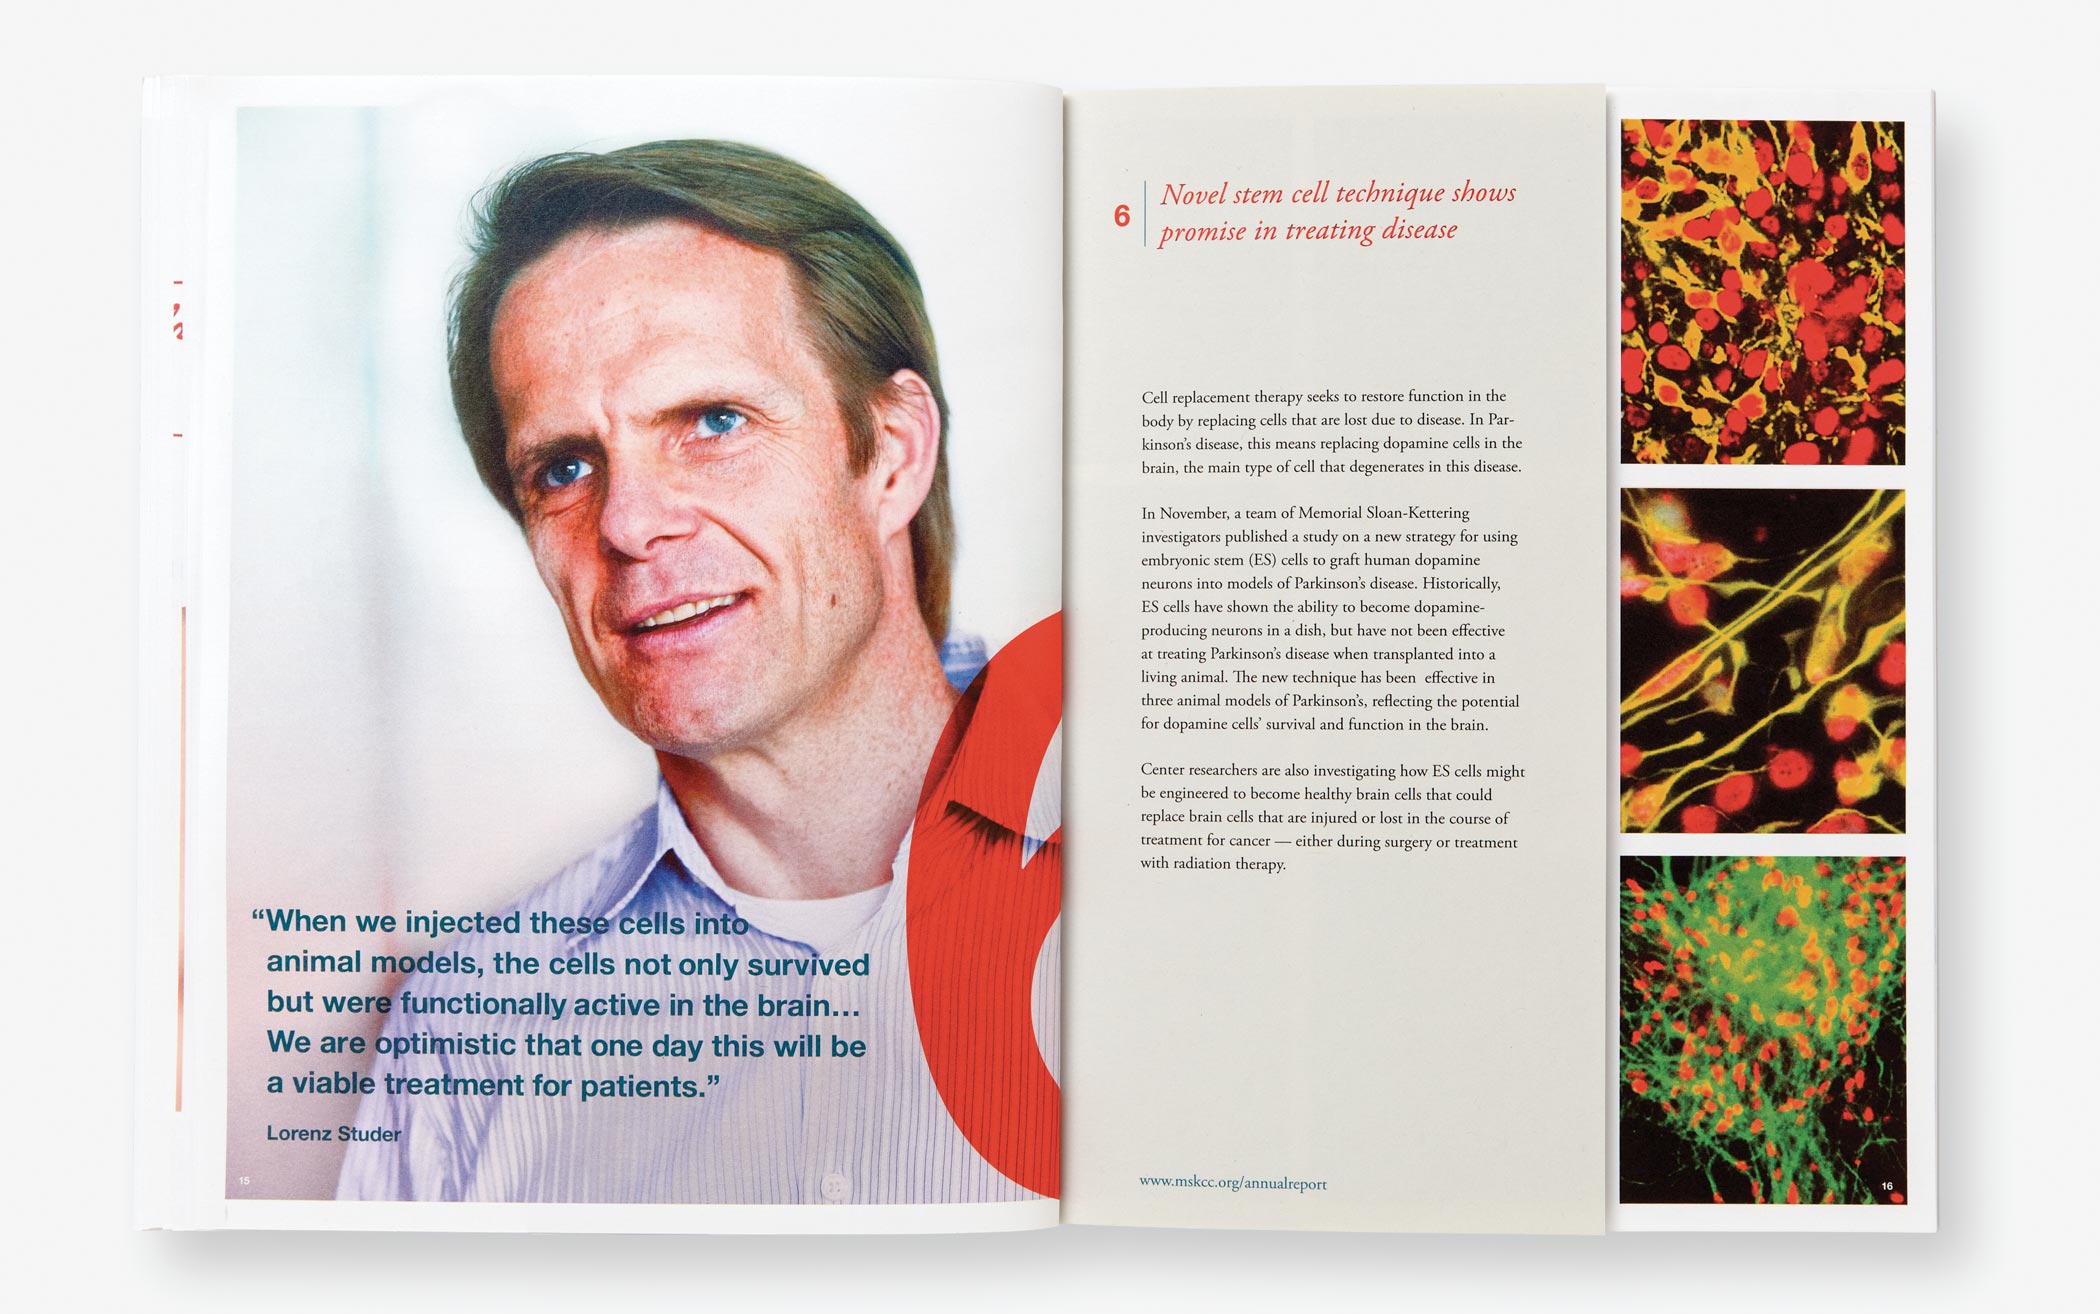 A portrait of Doctor Loren Studer discussing stem cell research in the Memorial Sloan-Kettering 2011 annual report.